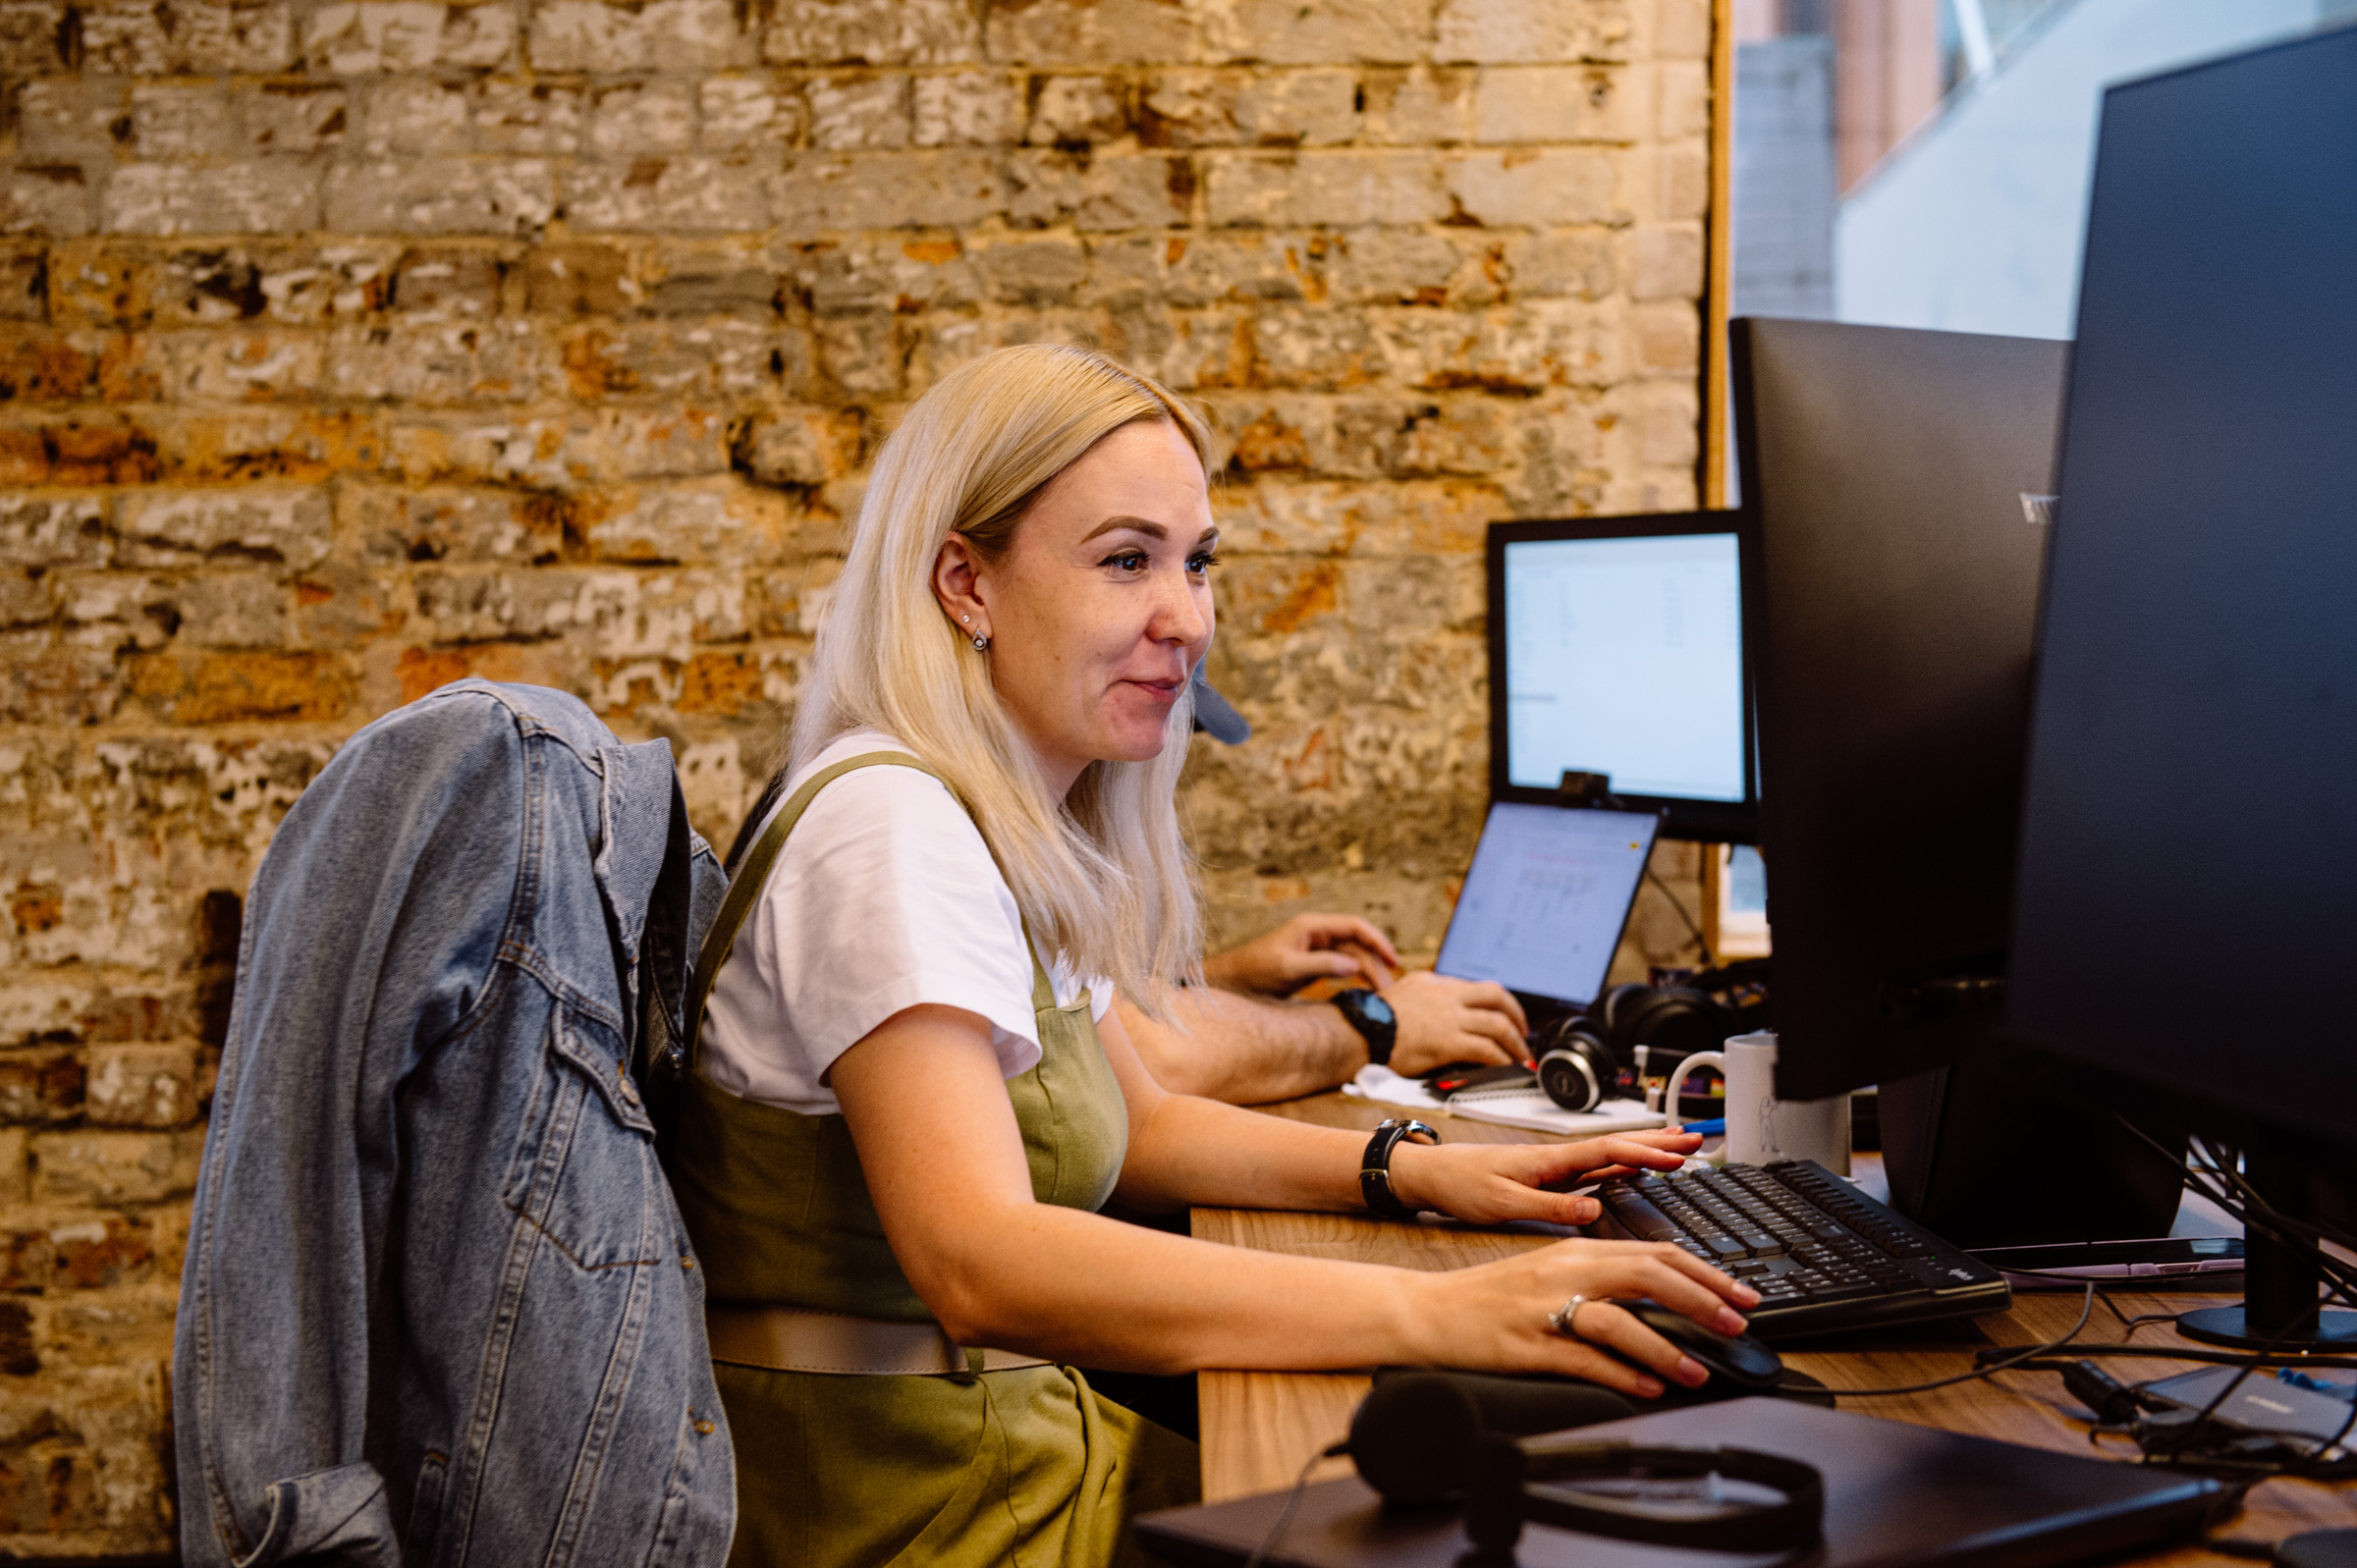 Zhanna, a Front End Engineer at Karbon, working hard at her desk.